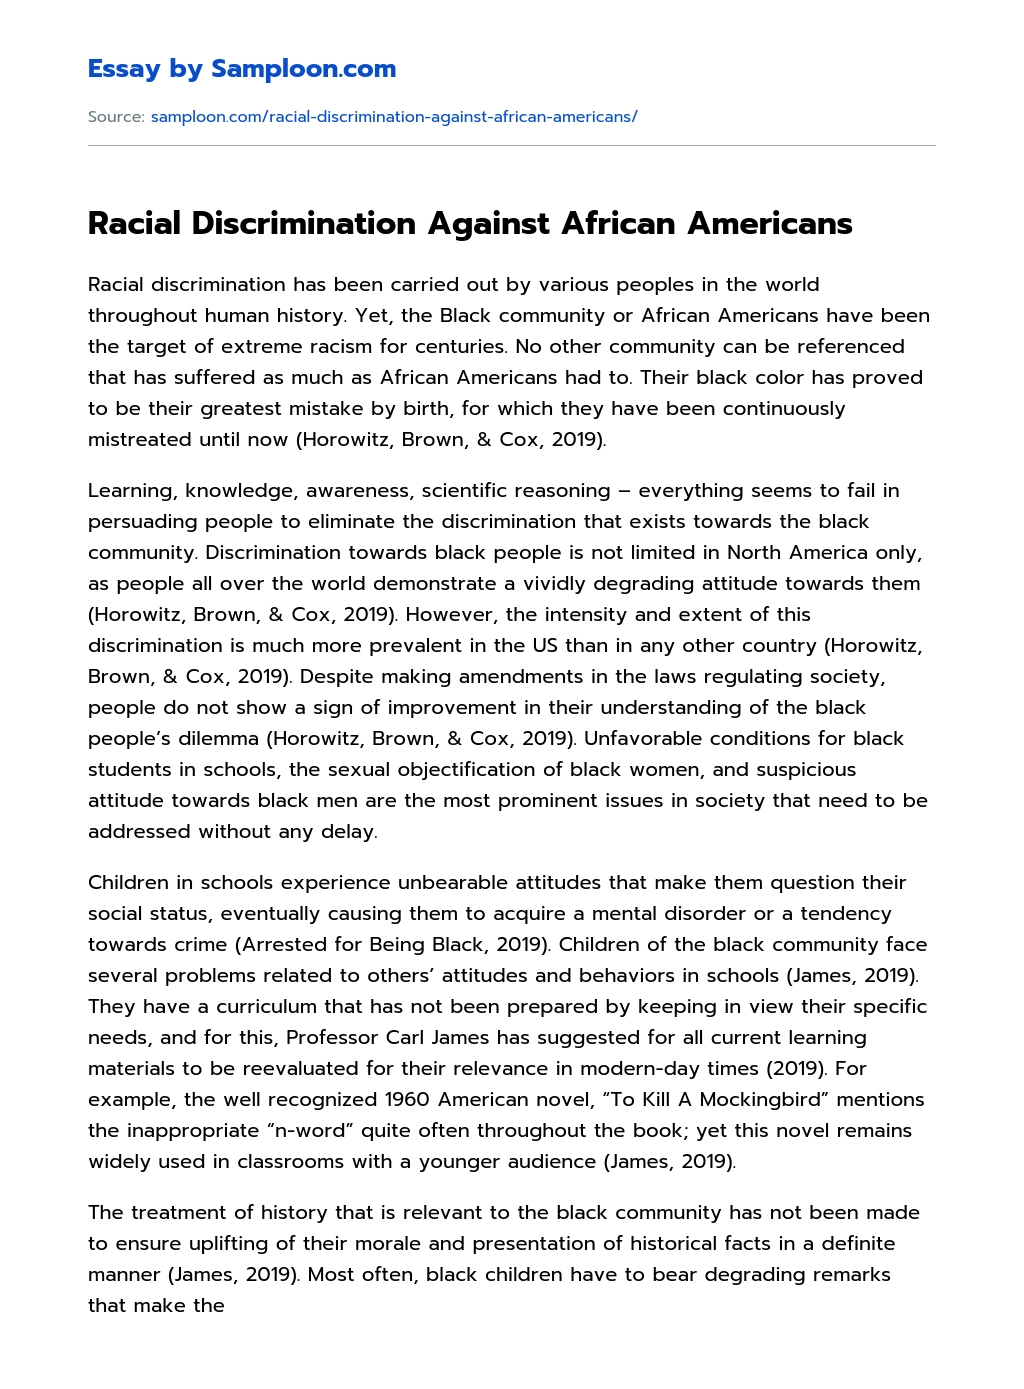 Racial Discrimination Against African Americans essay